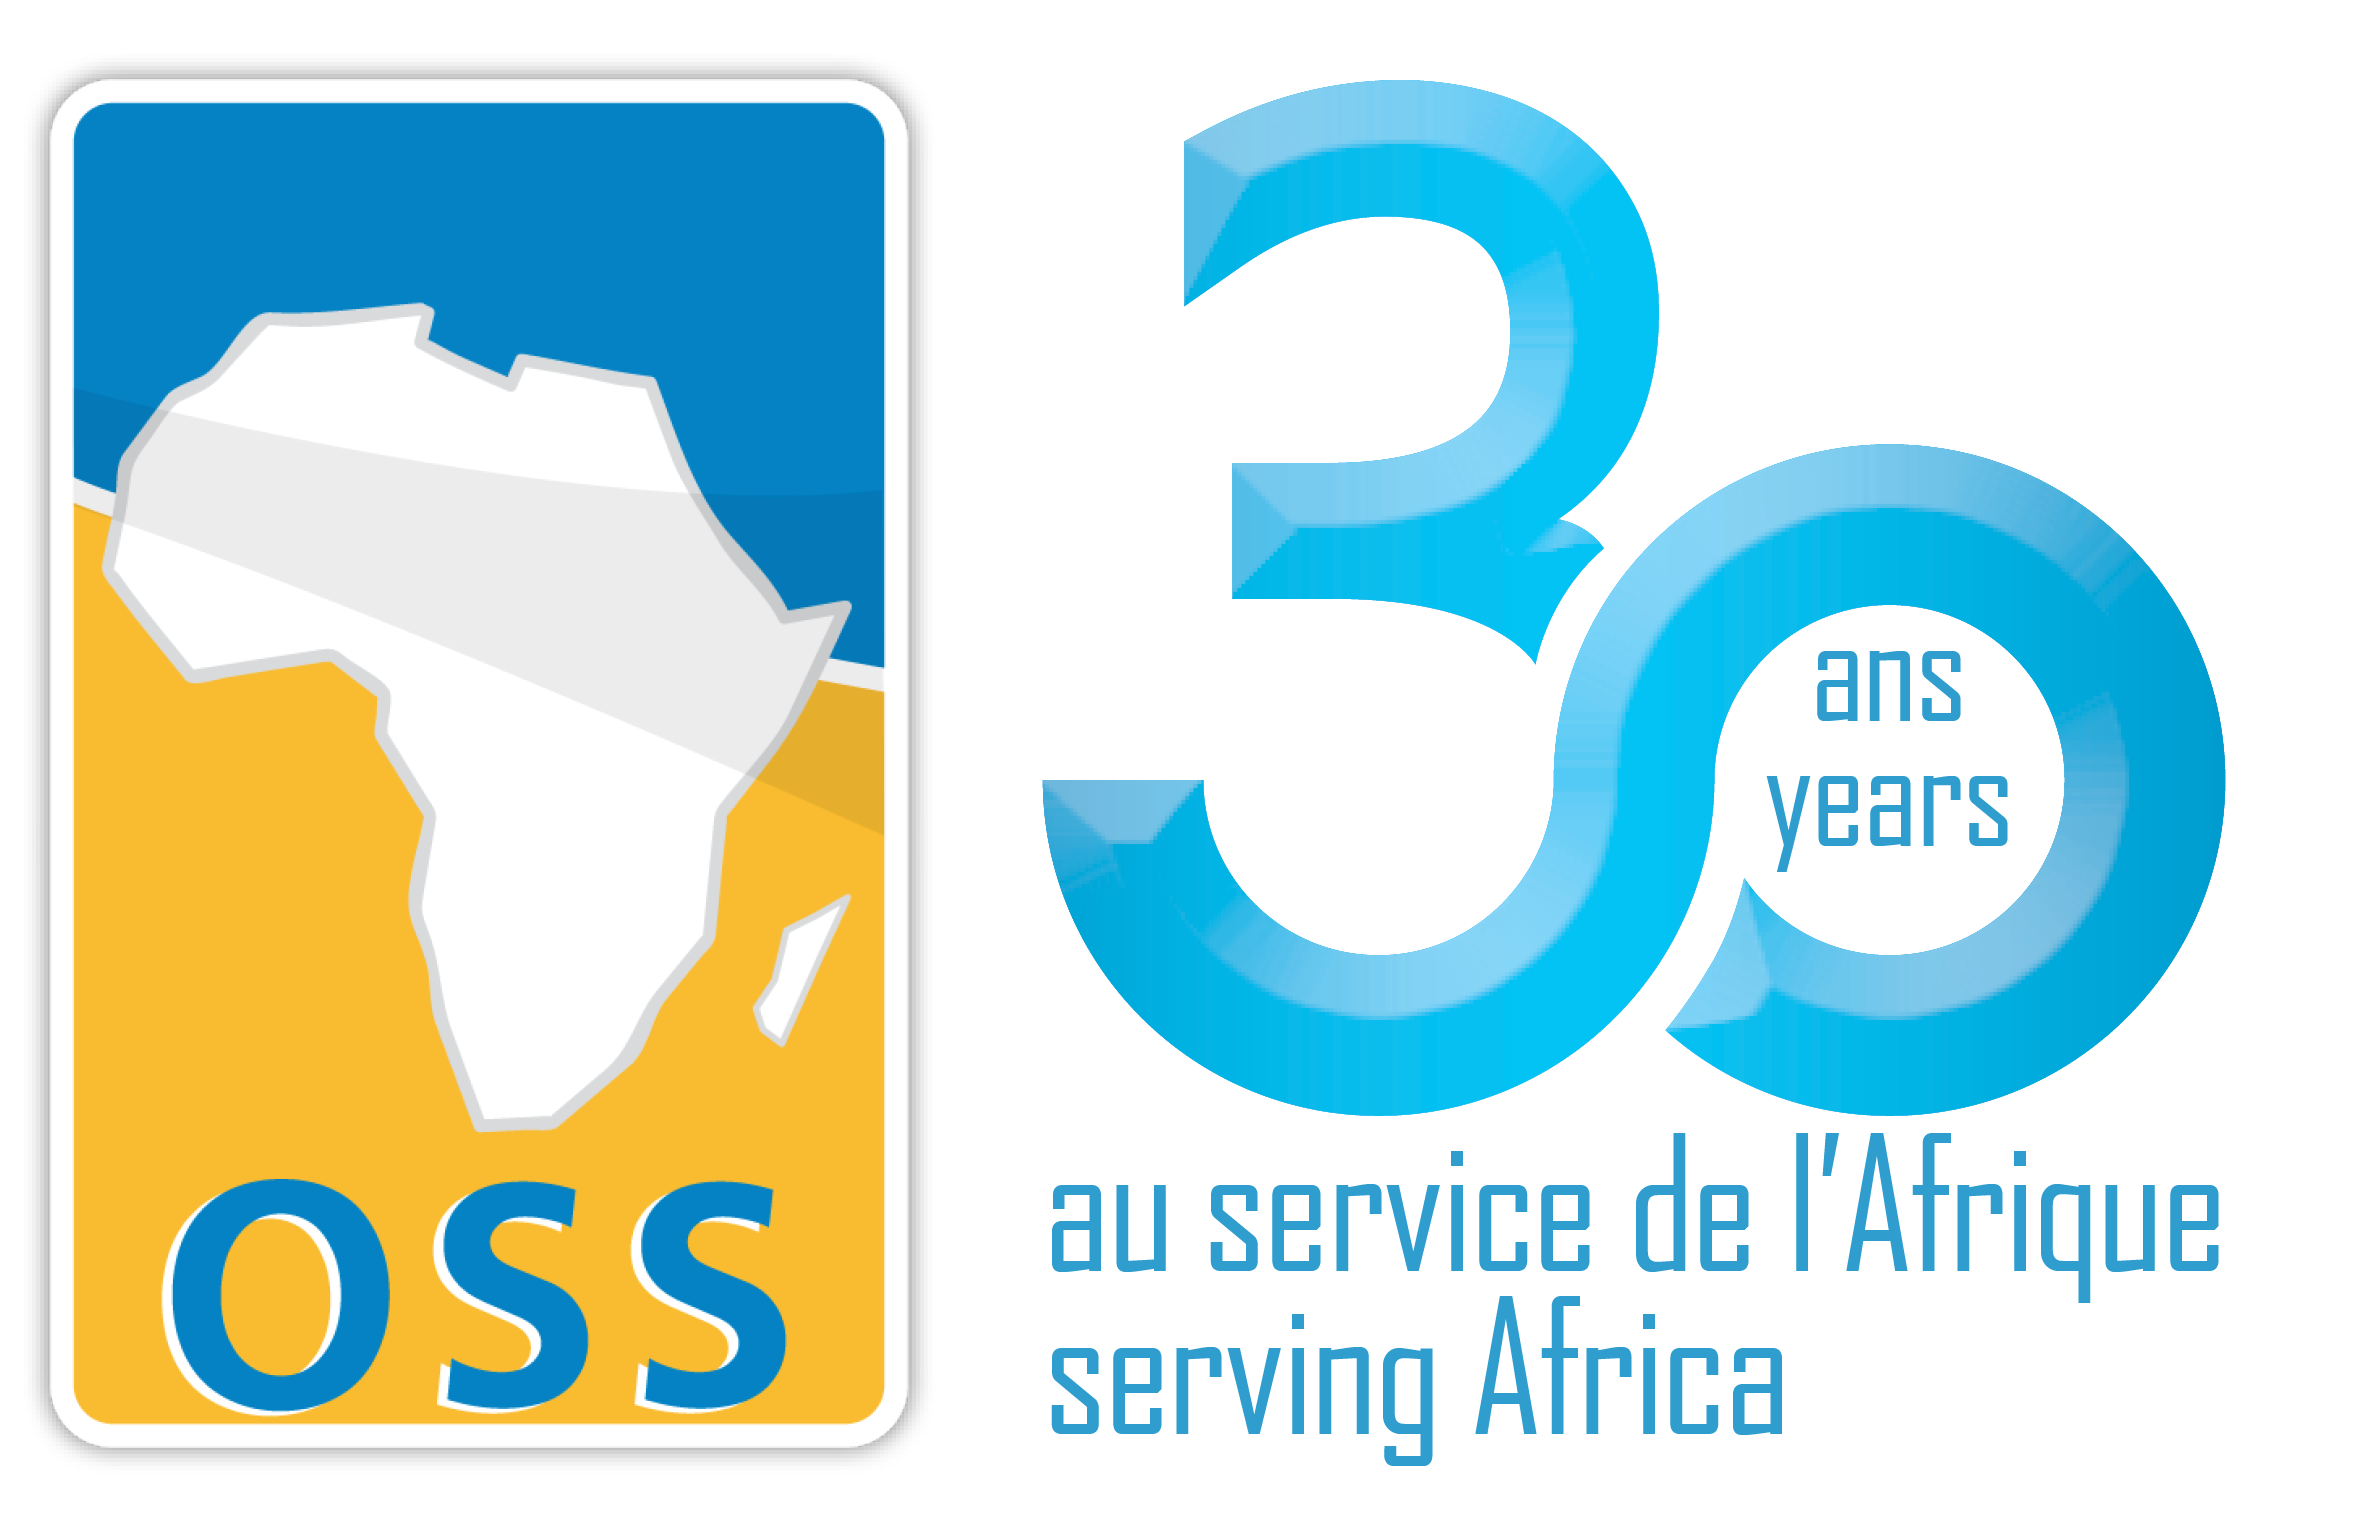 30 years serving Africa